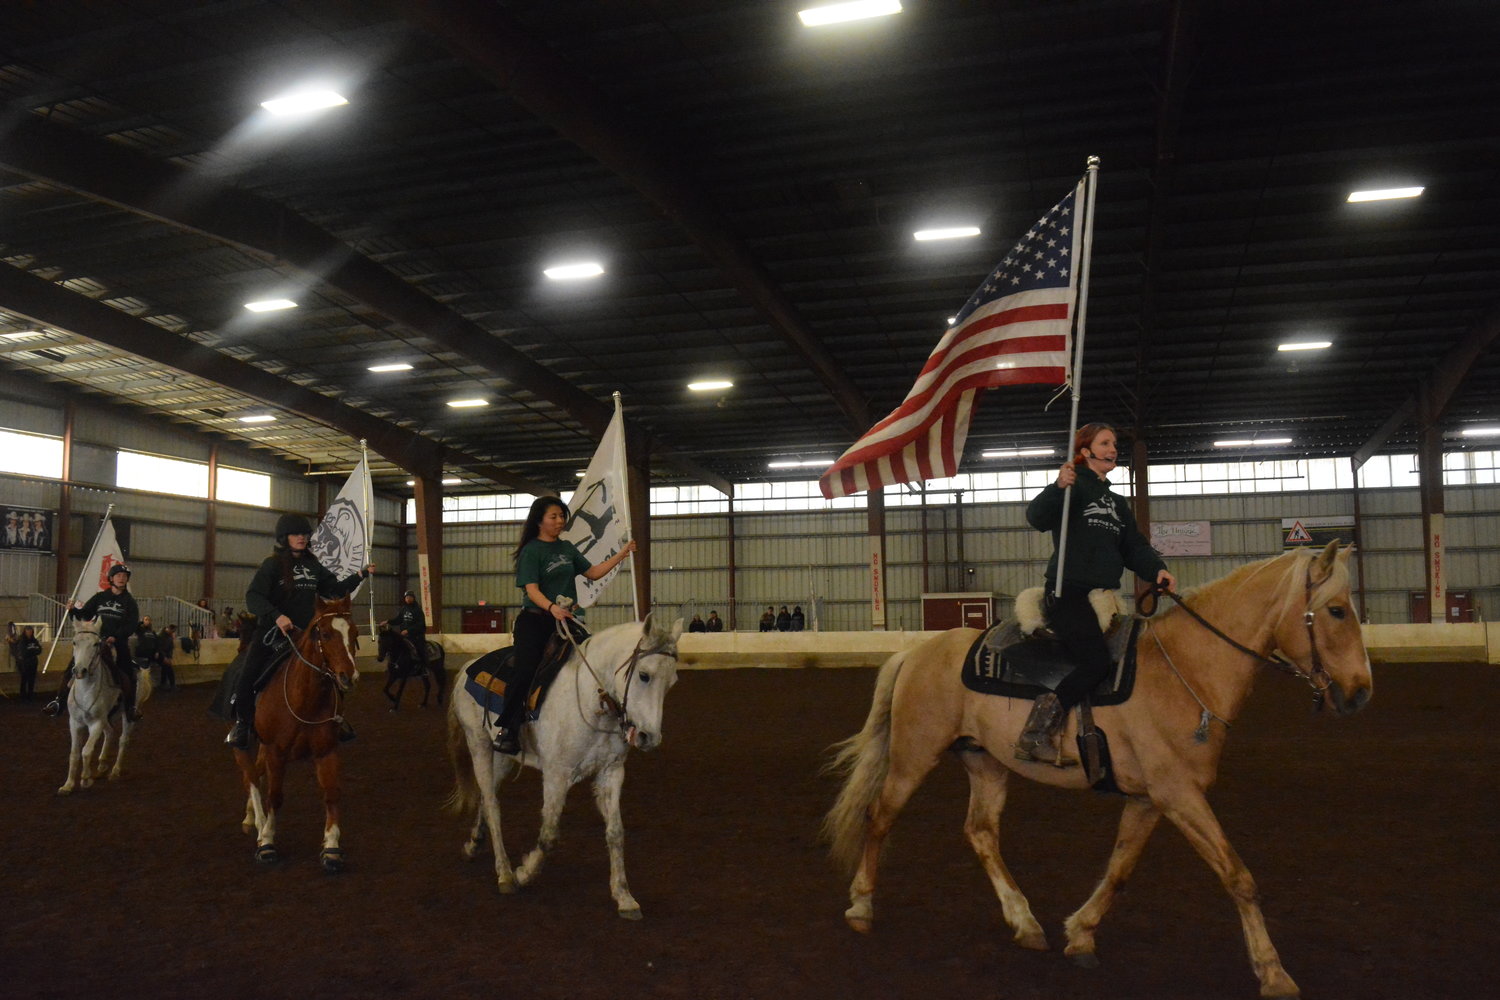 Mounted archers participated in a demonstration at the Washington State Horse Expo at the Clark County Fairgrounds in Ridgefield on Friday, March 4. After the archers completed their target practice, Katie Sterns led a flag ceremony atop her steed, Drogo. The rest of the team followed behind in unison as they circled the stadium.